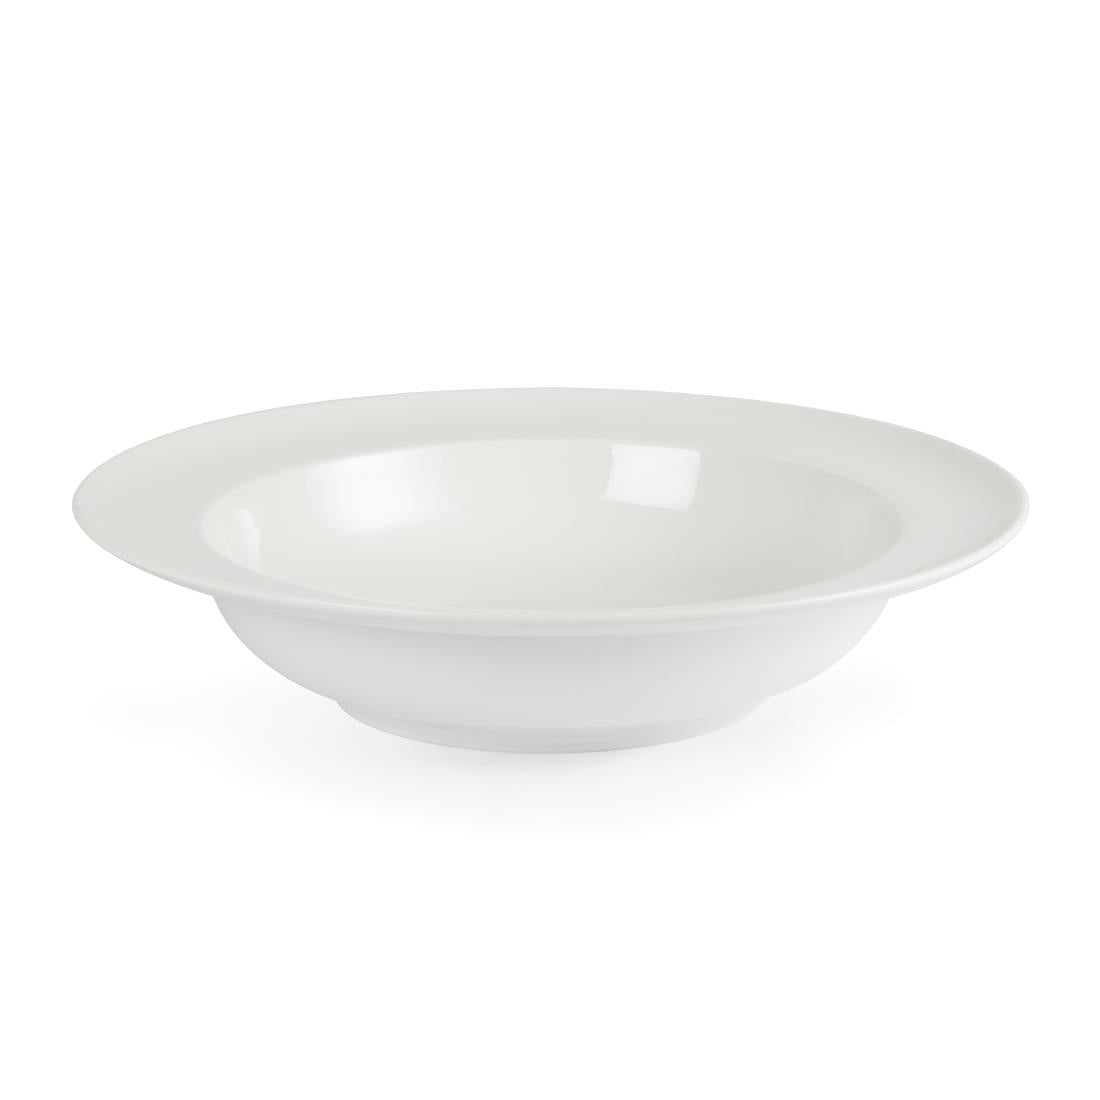 CB694 Olympia Whiteware Wide Rim Bowls 228mm 710ml 25oz (Pack of 4)